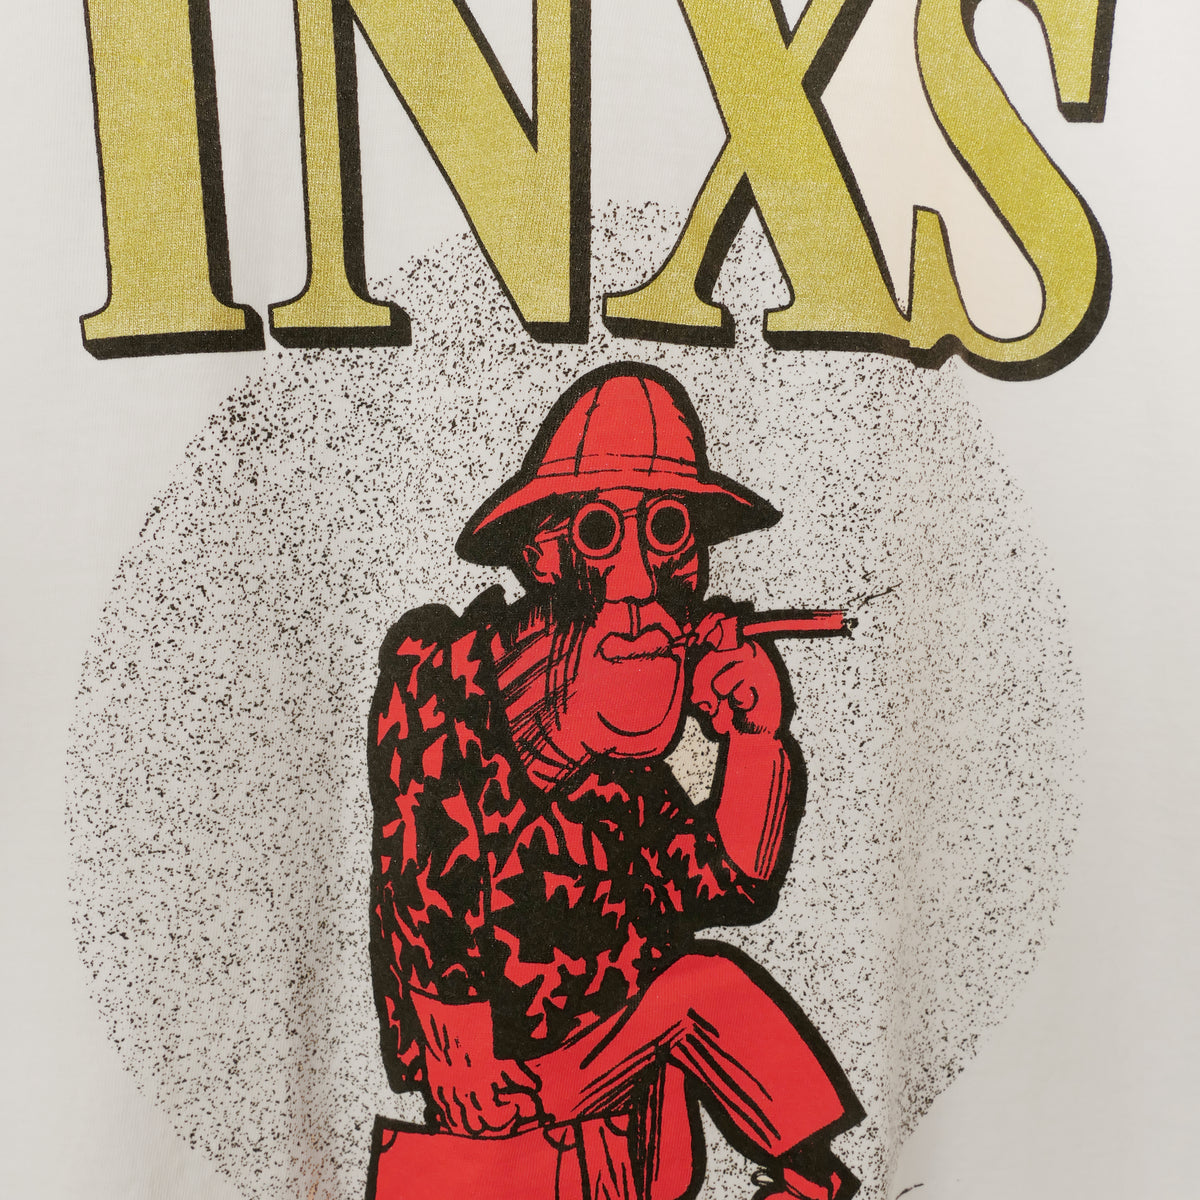 INXS Fear And Loathing Tee